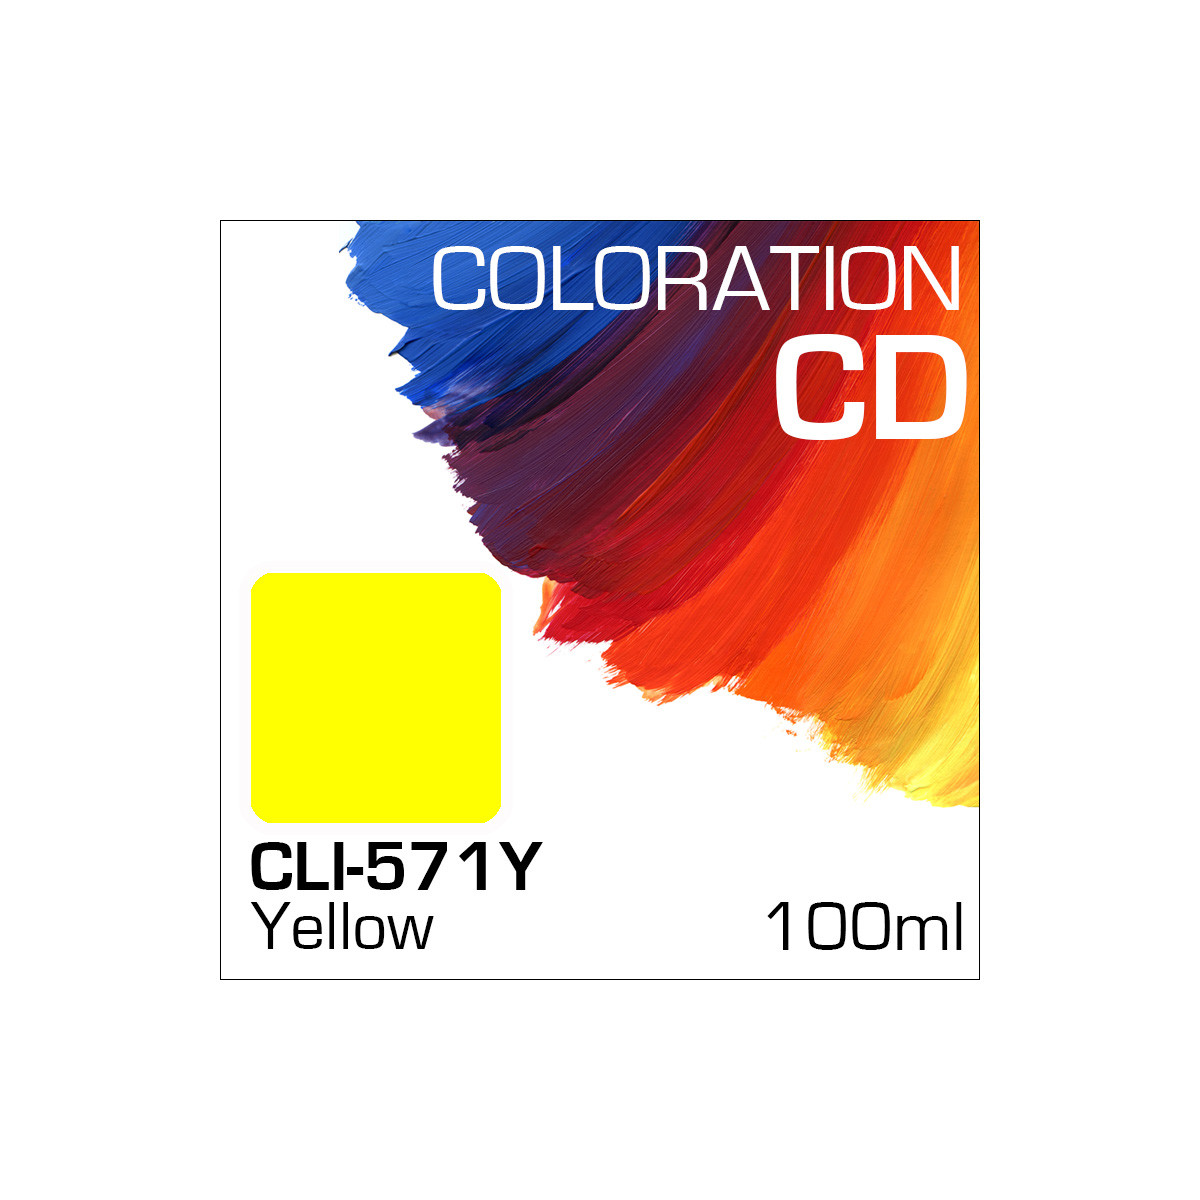 Coloration CD Flasche 100ml CLI-571Y Yellow